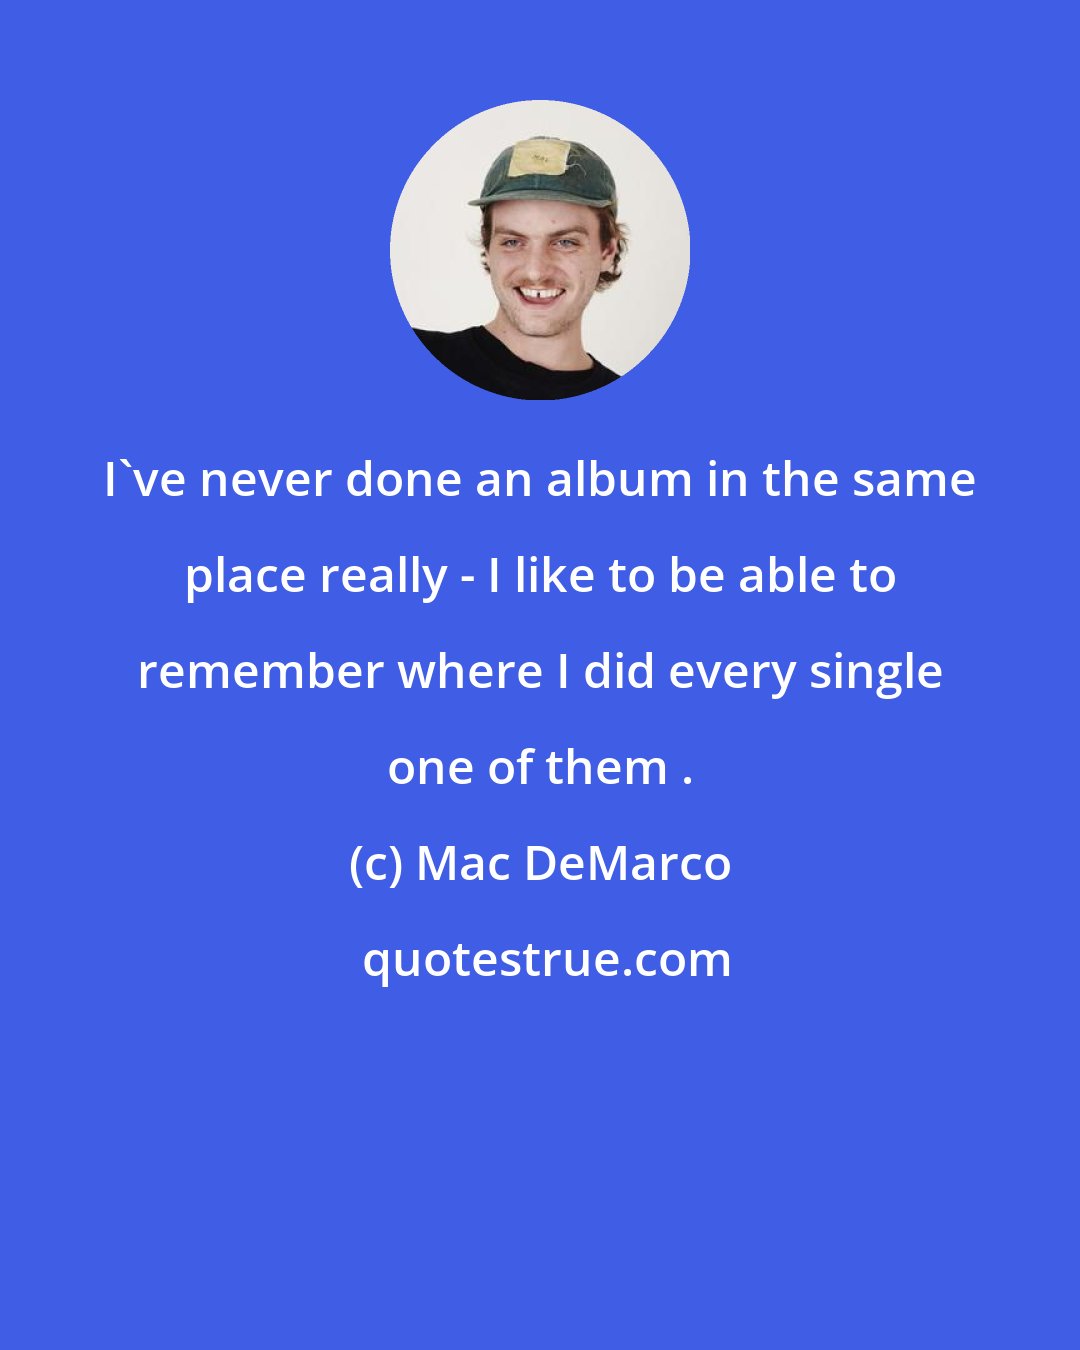 Mac DeMarco: I've never done an album in the same place really - I like to be able to remember where I did every single one of them .